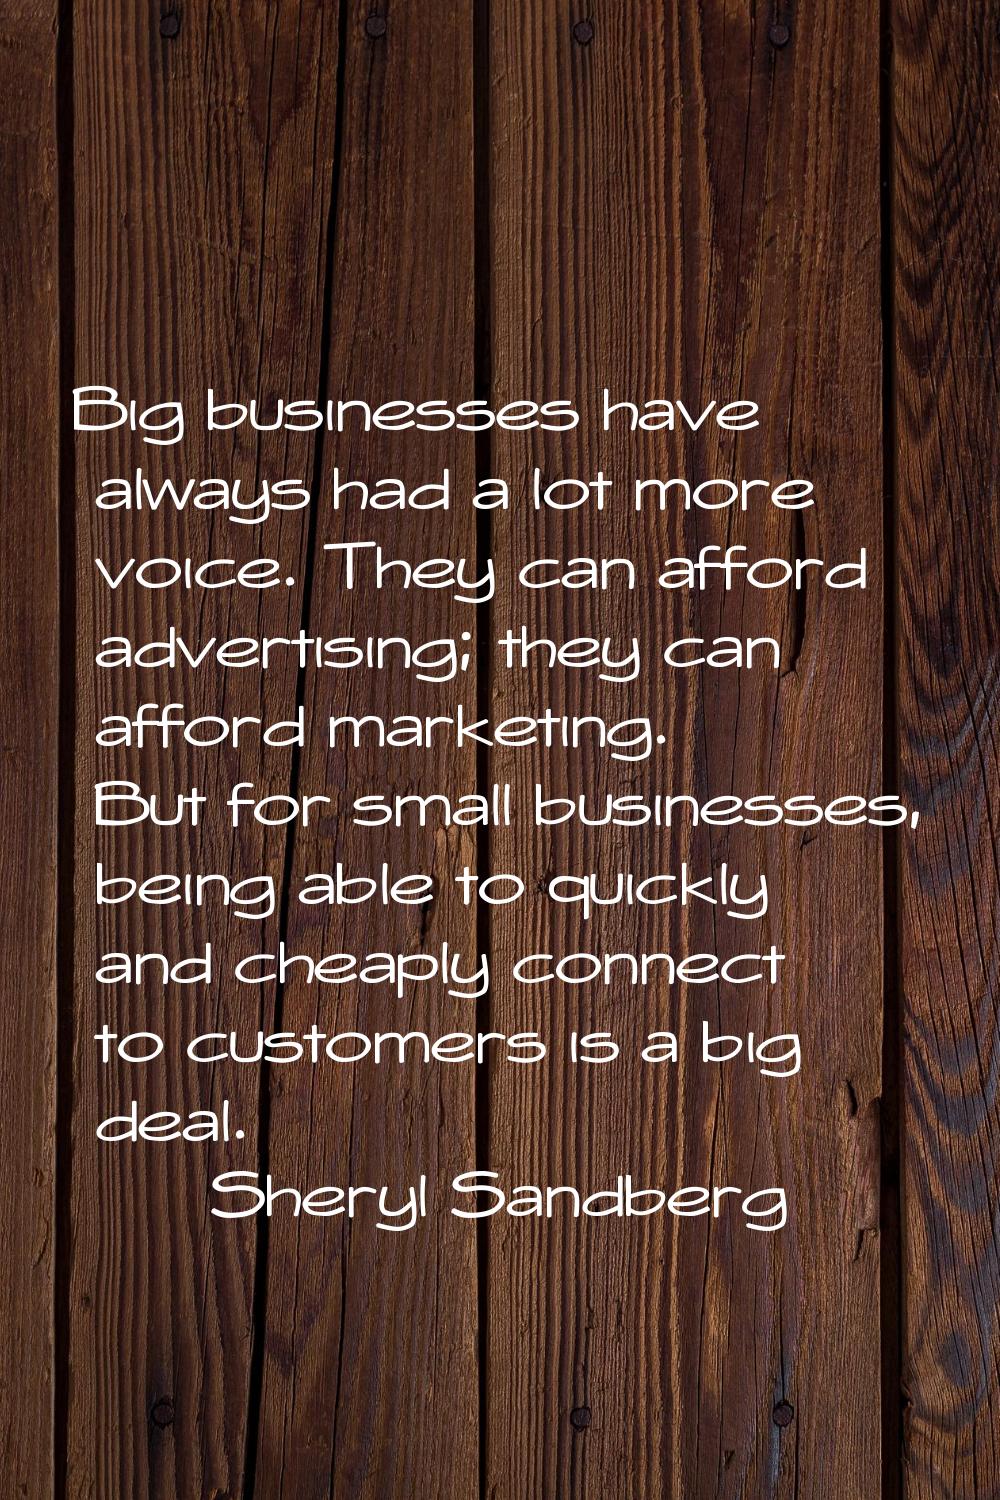 Big businesses have always had a lot more voice. They can afford advertising; they can afford marke